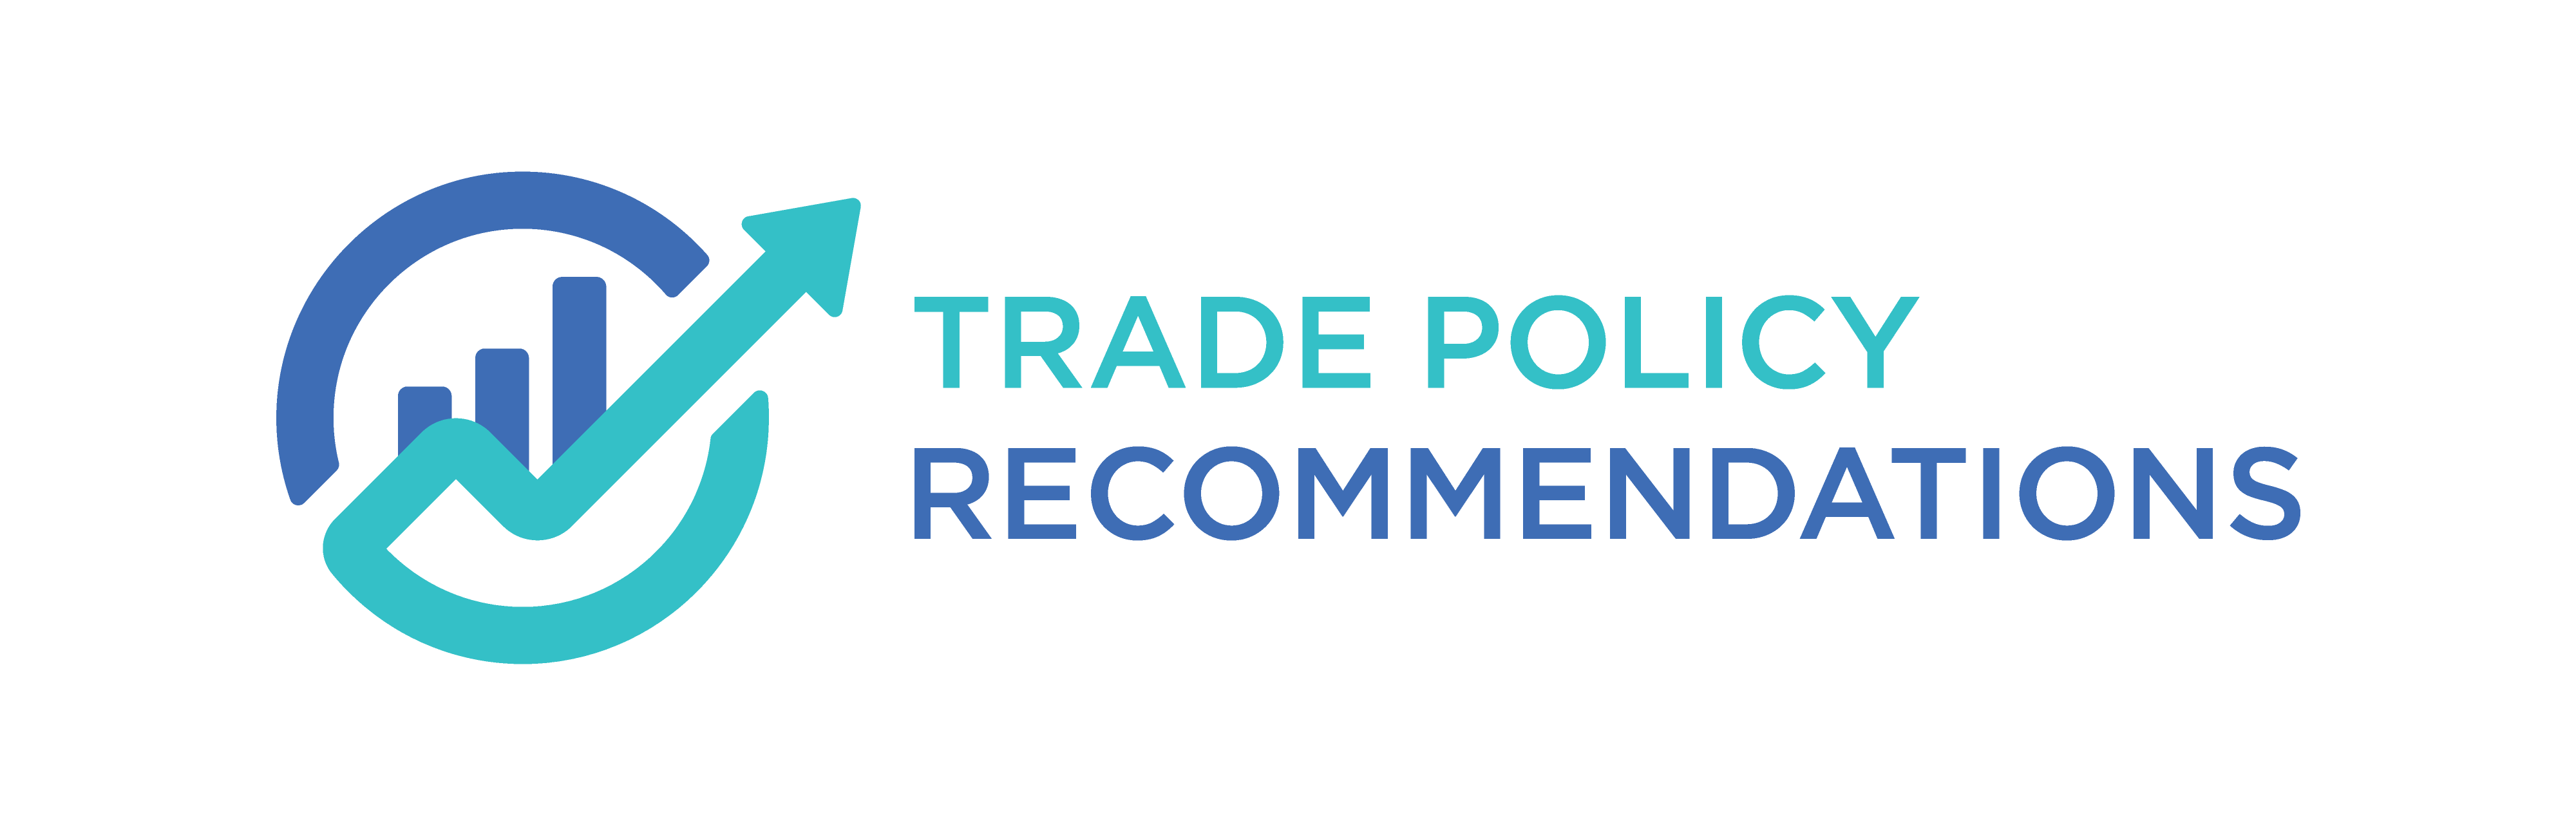 <h1>Trade Policy Recommendation</h1>